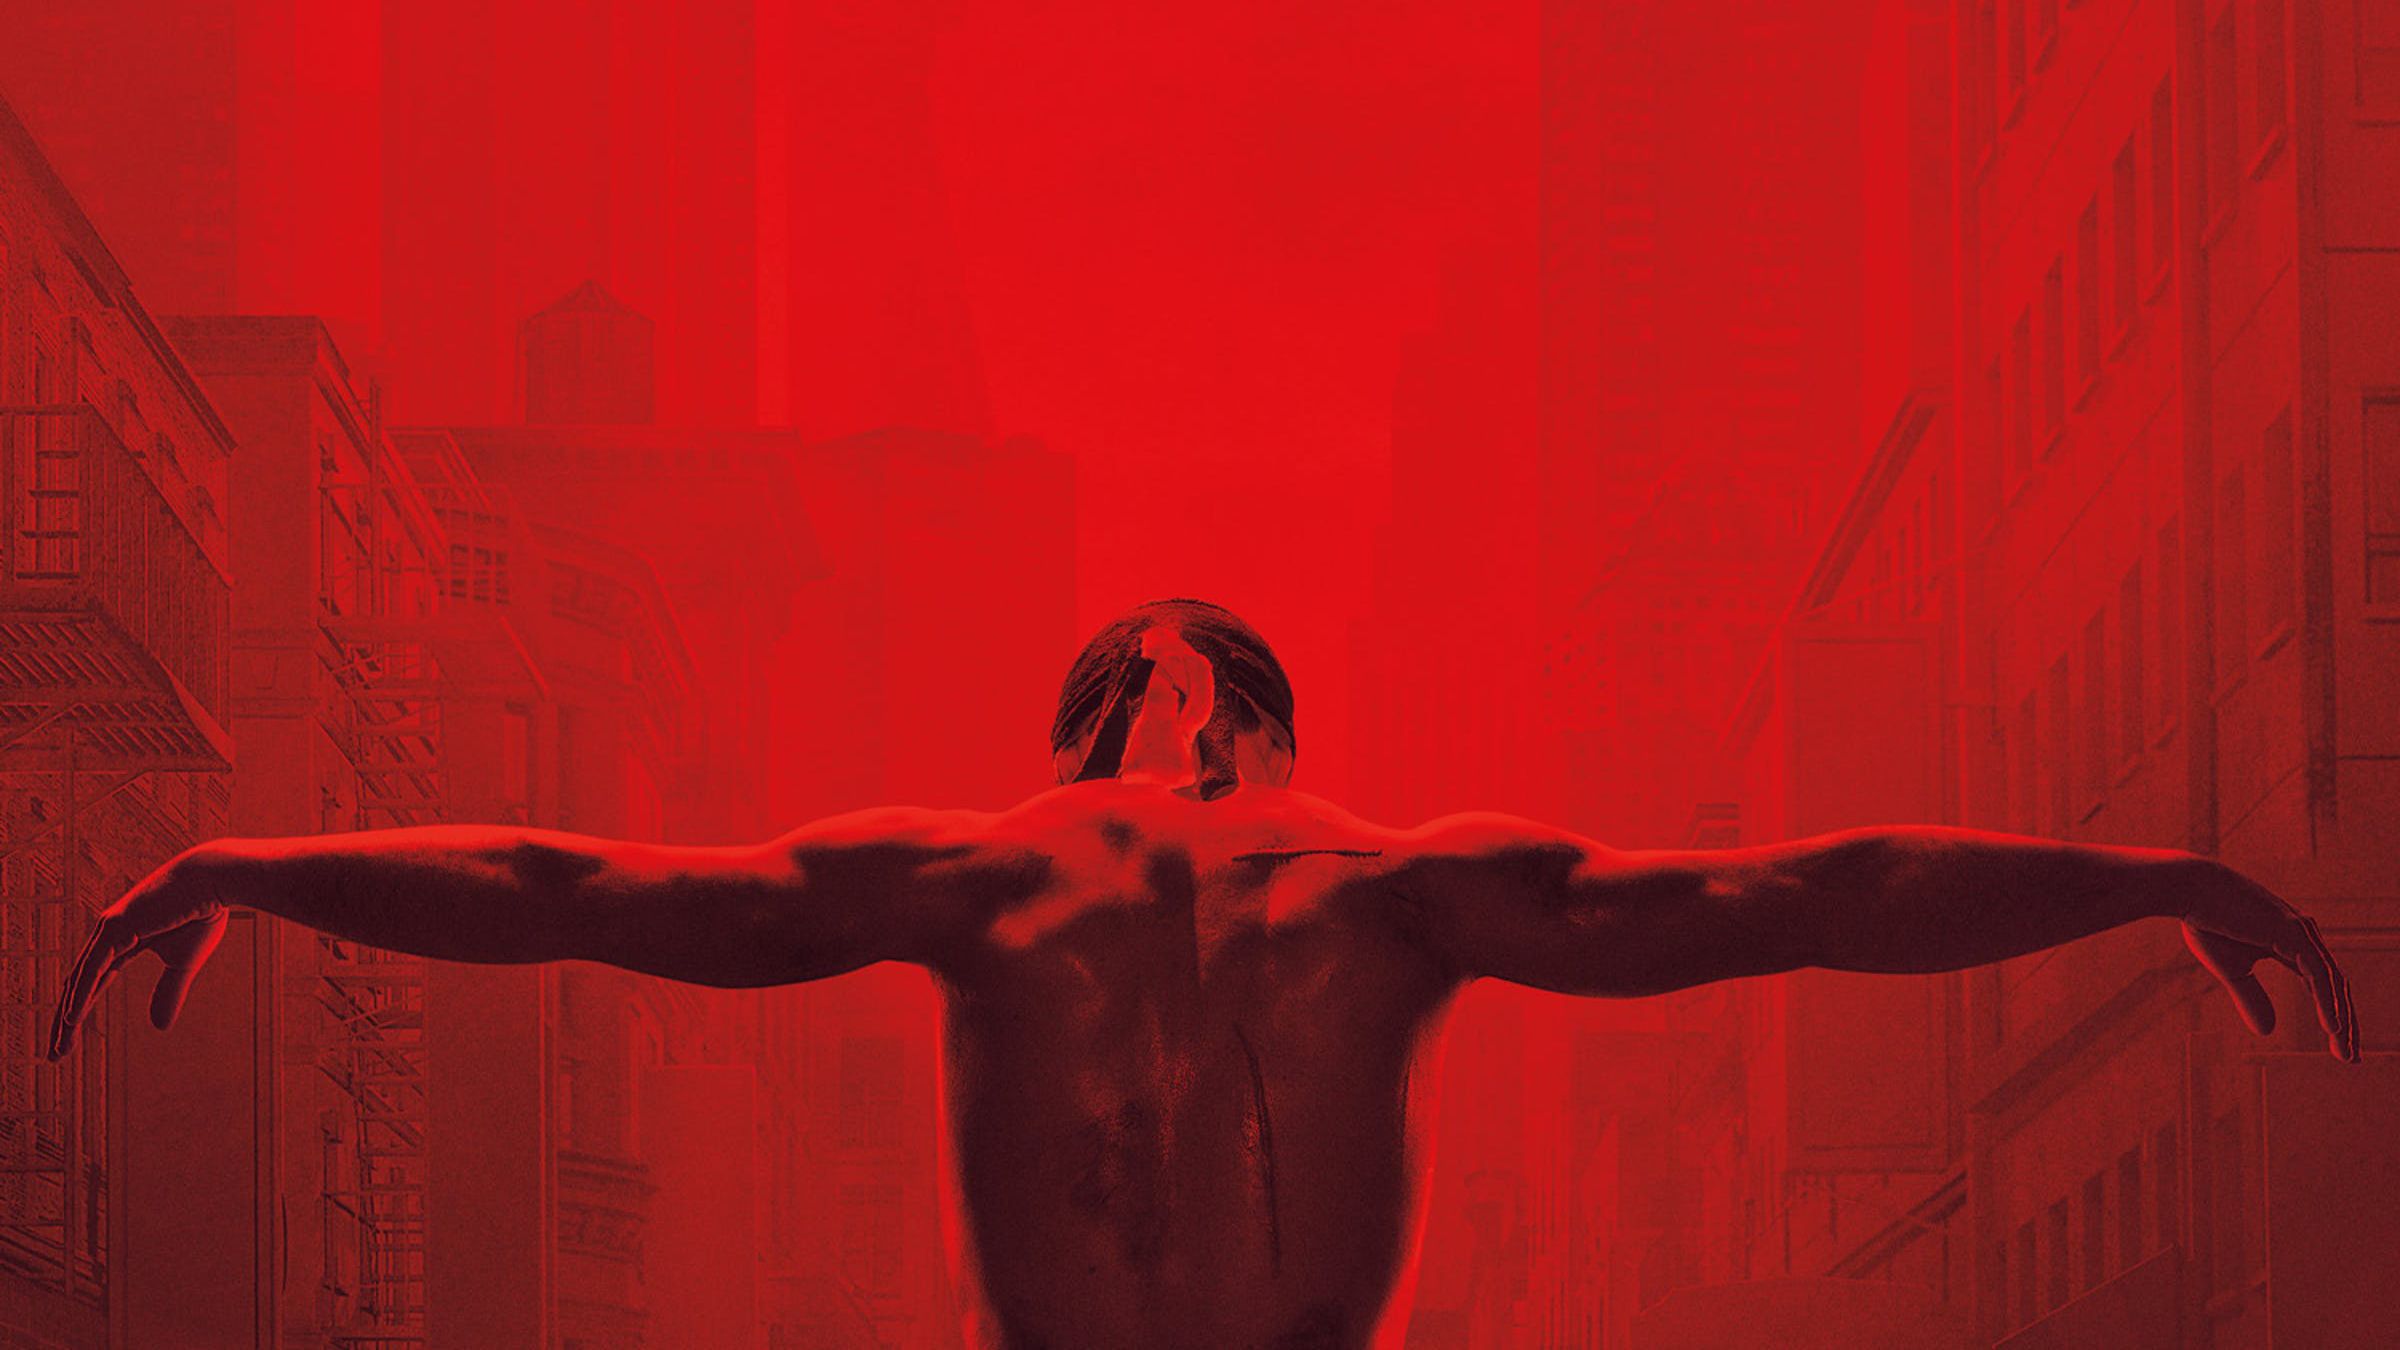 Daredevil Season 3 Poster, HD Tv Shows, 4k Wallpaper, Image, Background, Photo and Picture